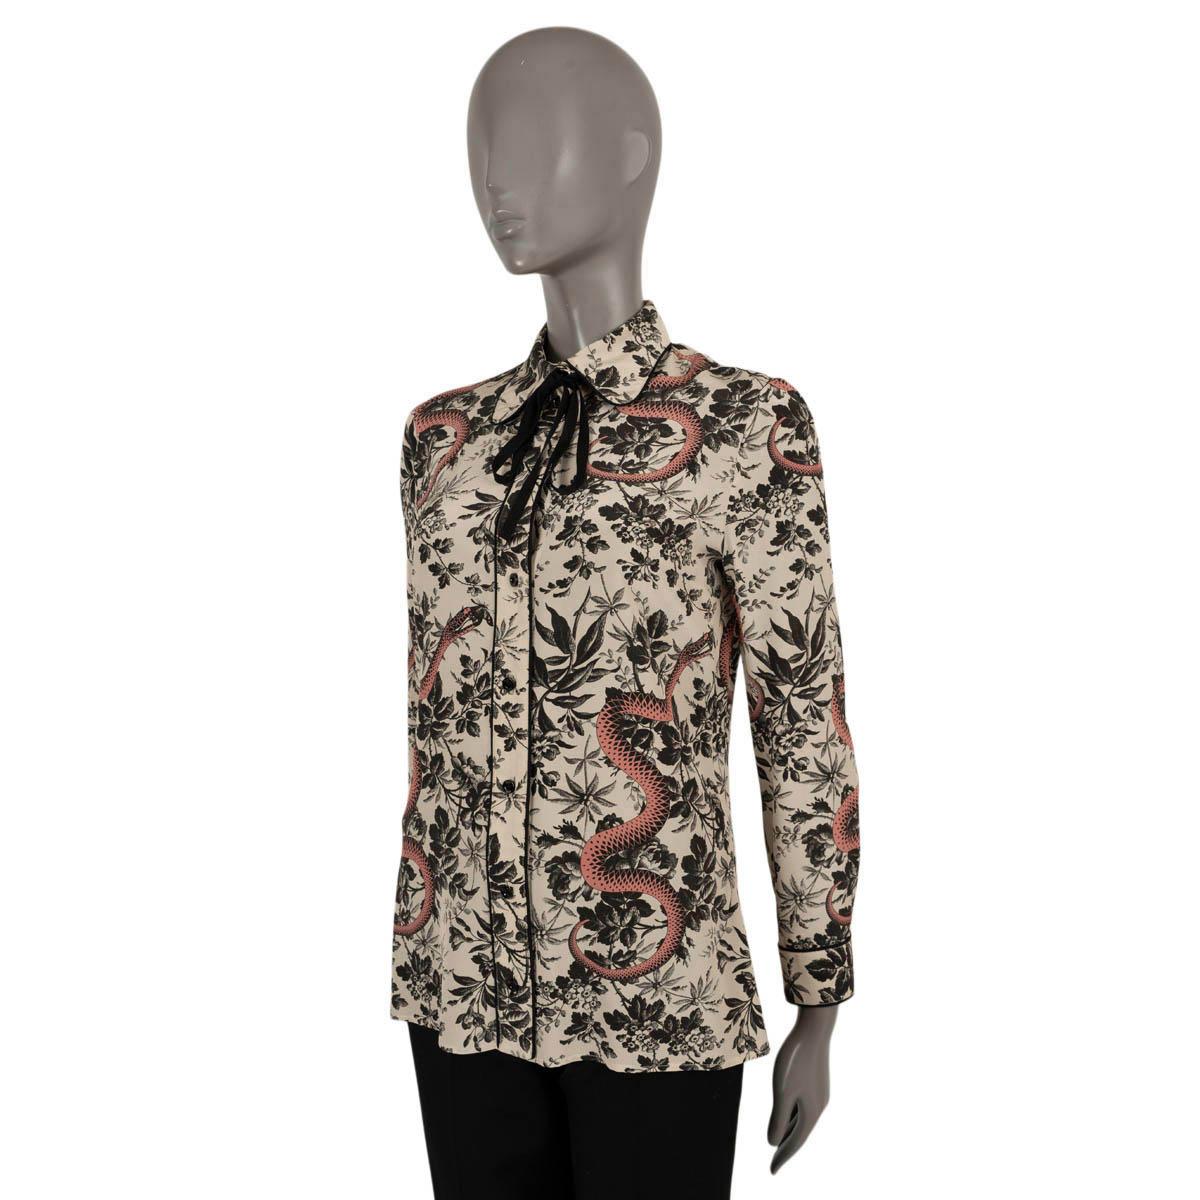 100% authentic Gucci Herbarium Snake Print blouse in pale pink crepe silk (100% - please note the content tag is missing). Features floral print in black, pink snakes and black piping. Closes with buttons on the front. Has been worn and is in